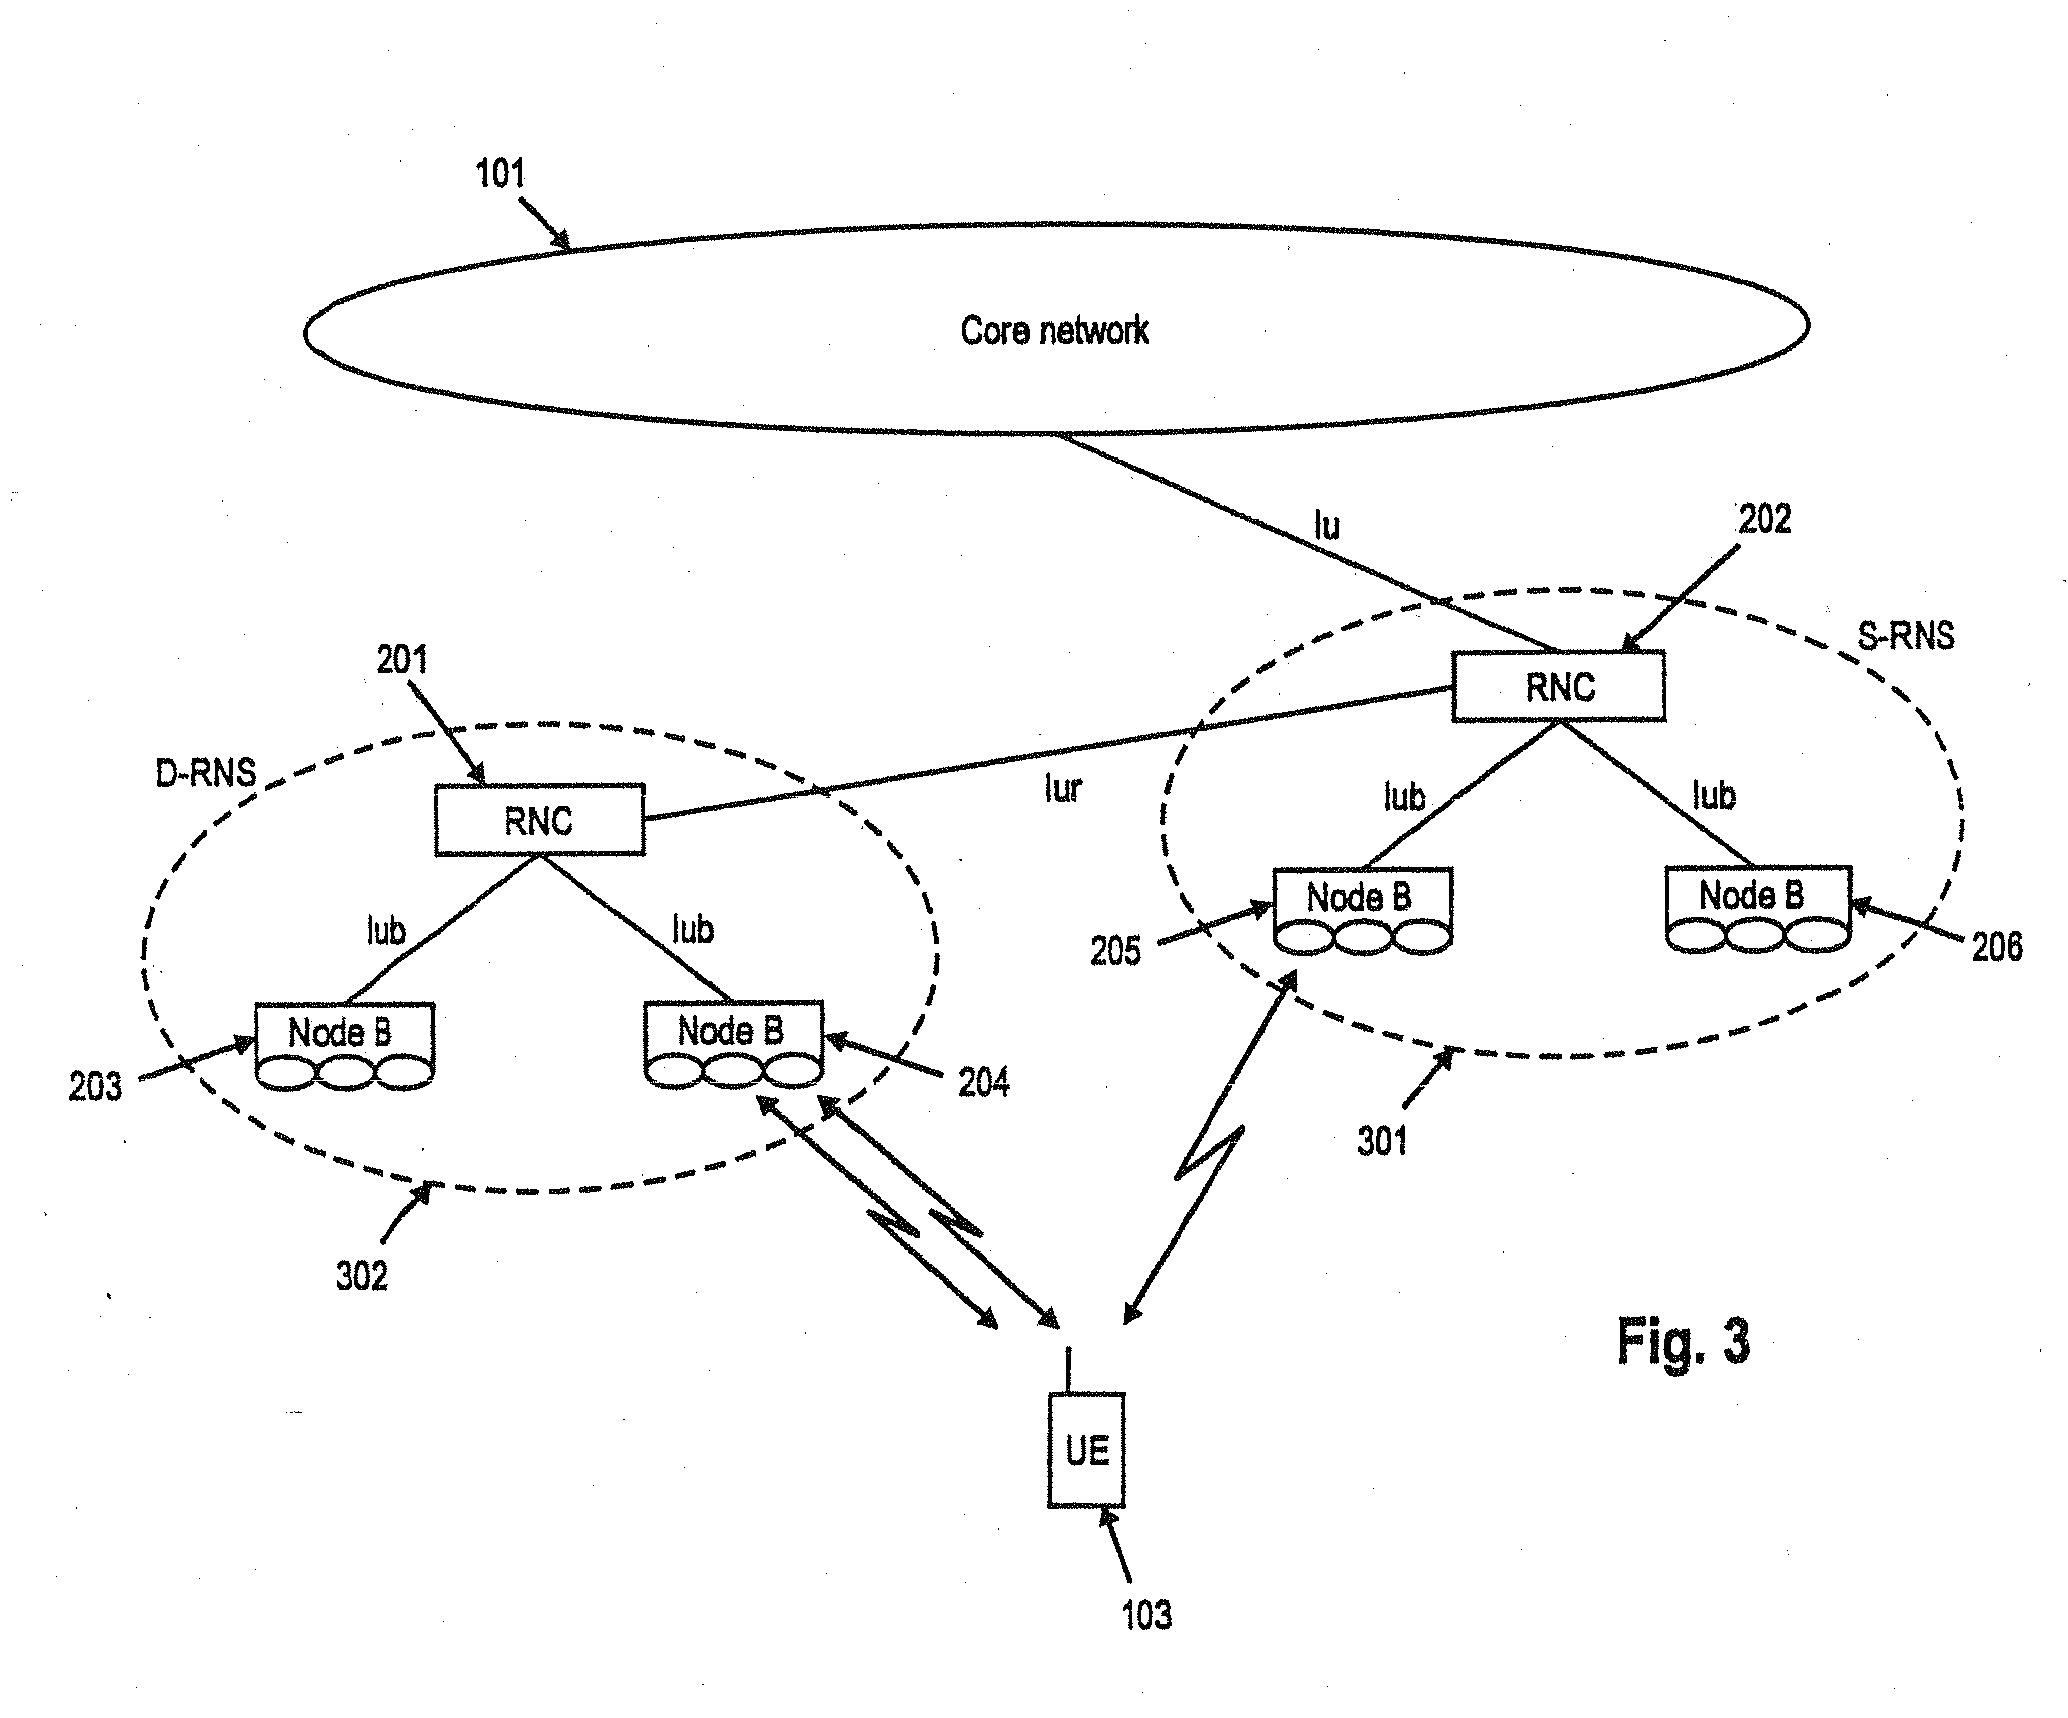 Mac layer reconfiguration in a mobile communication system